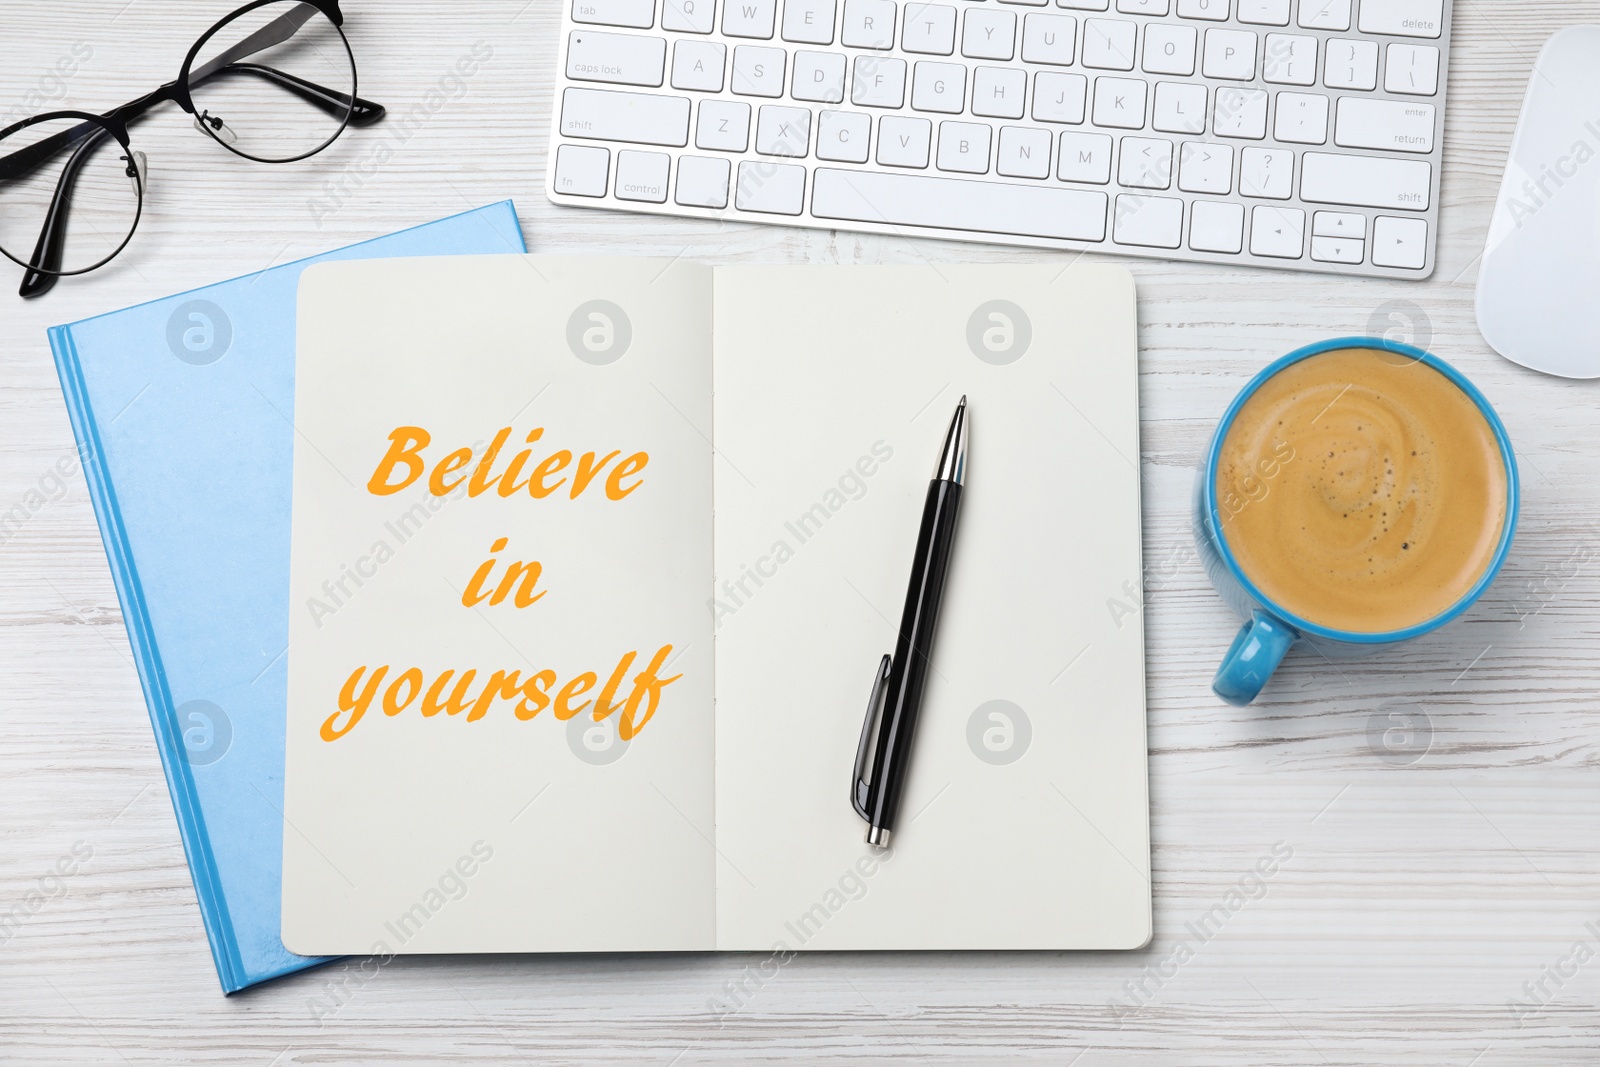 Image of Phrase Believe in Yourself in notebook, computer keyboard and cup of coffee on white wooden desk, flat lay